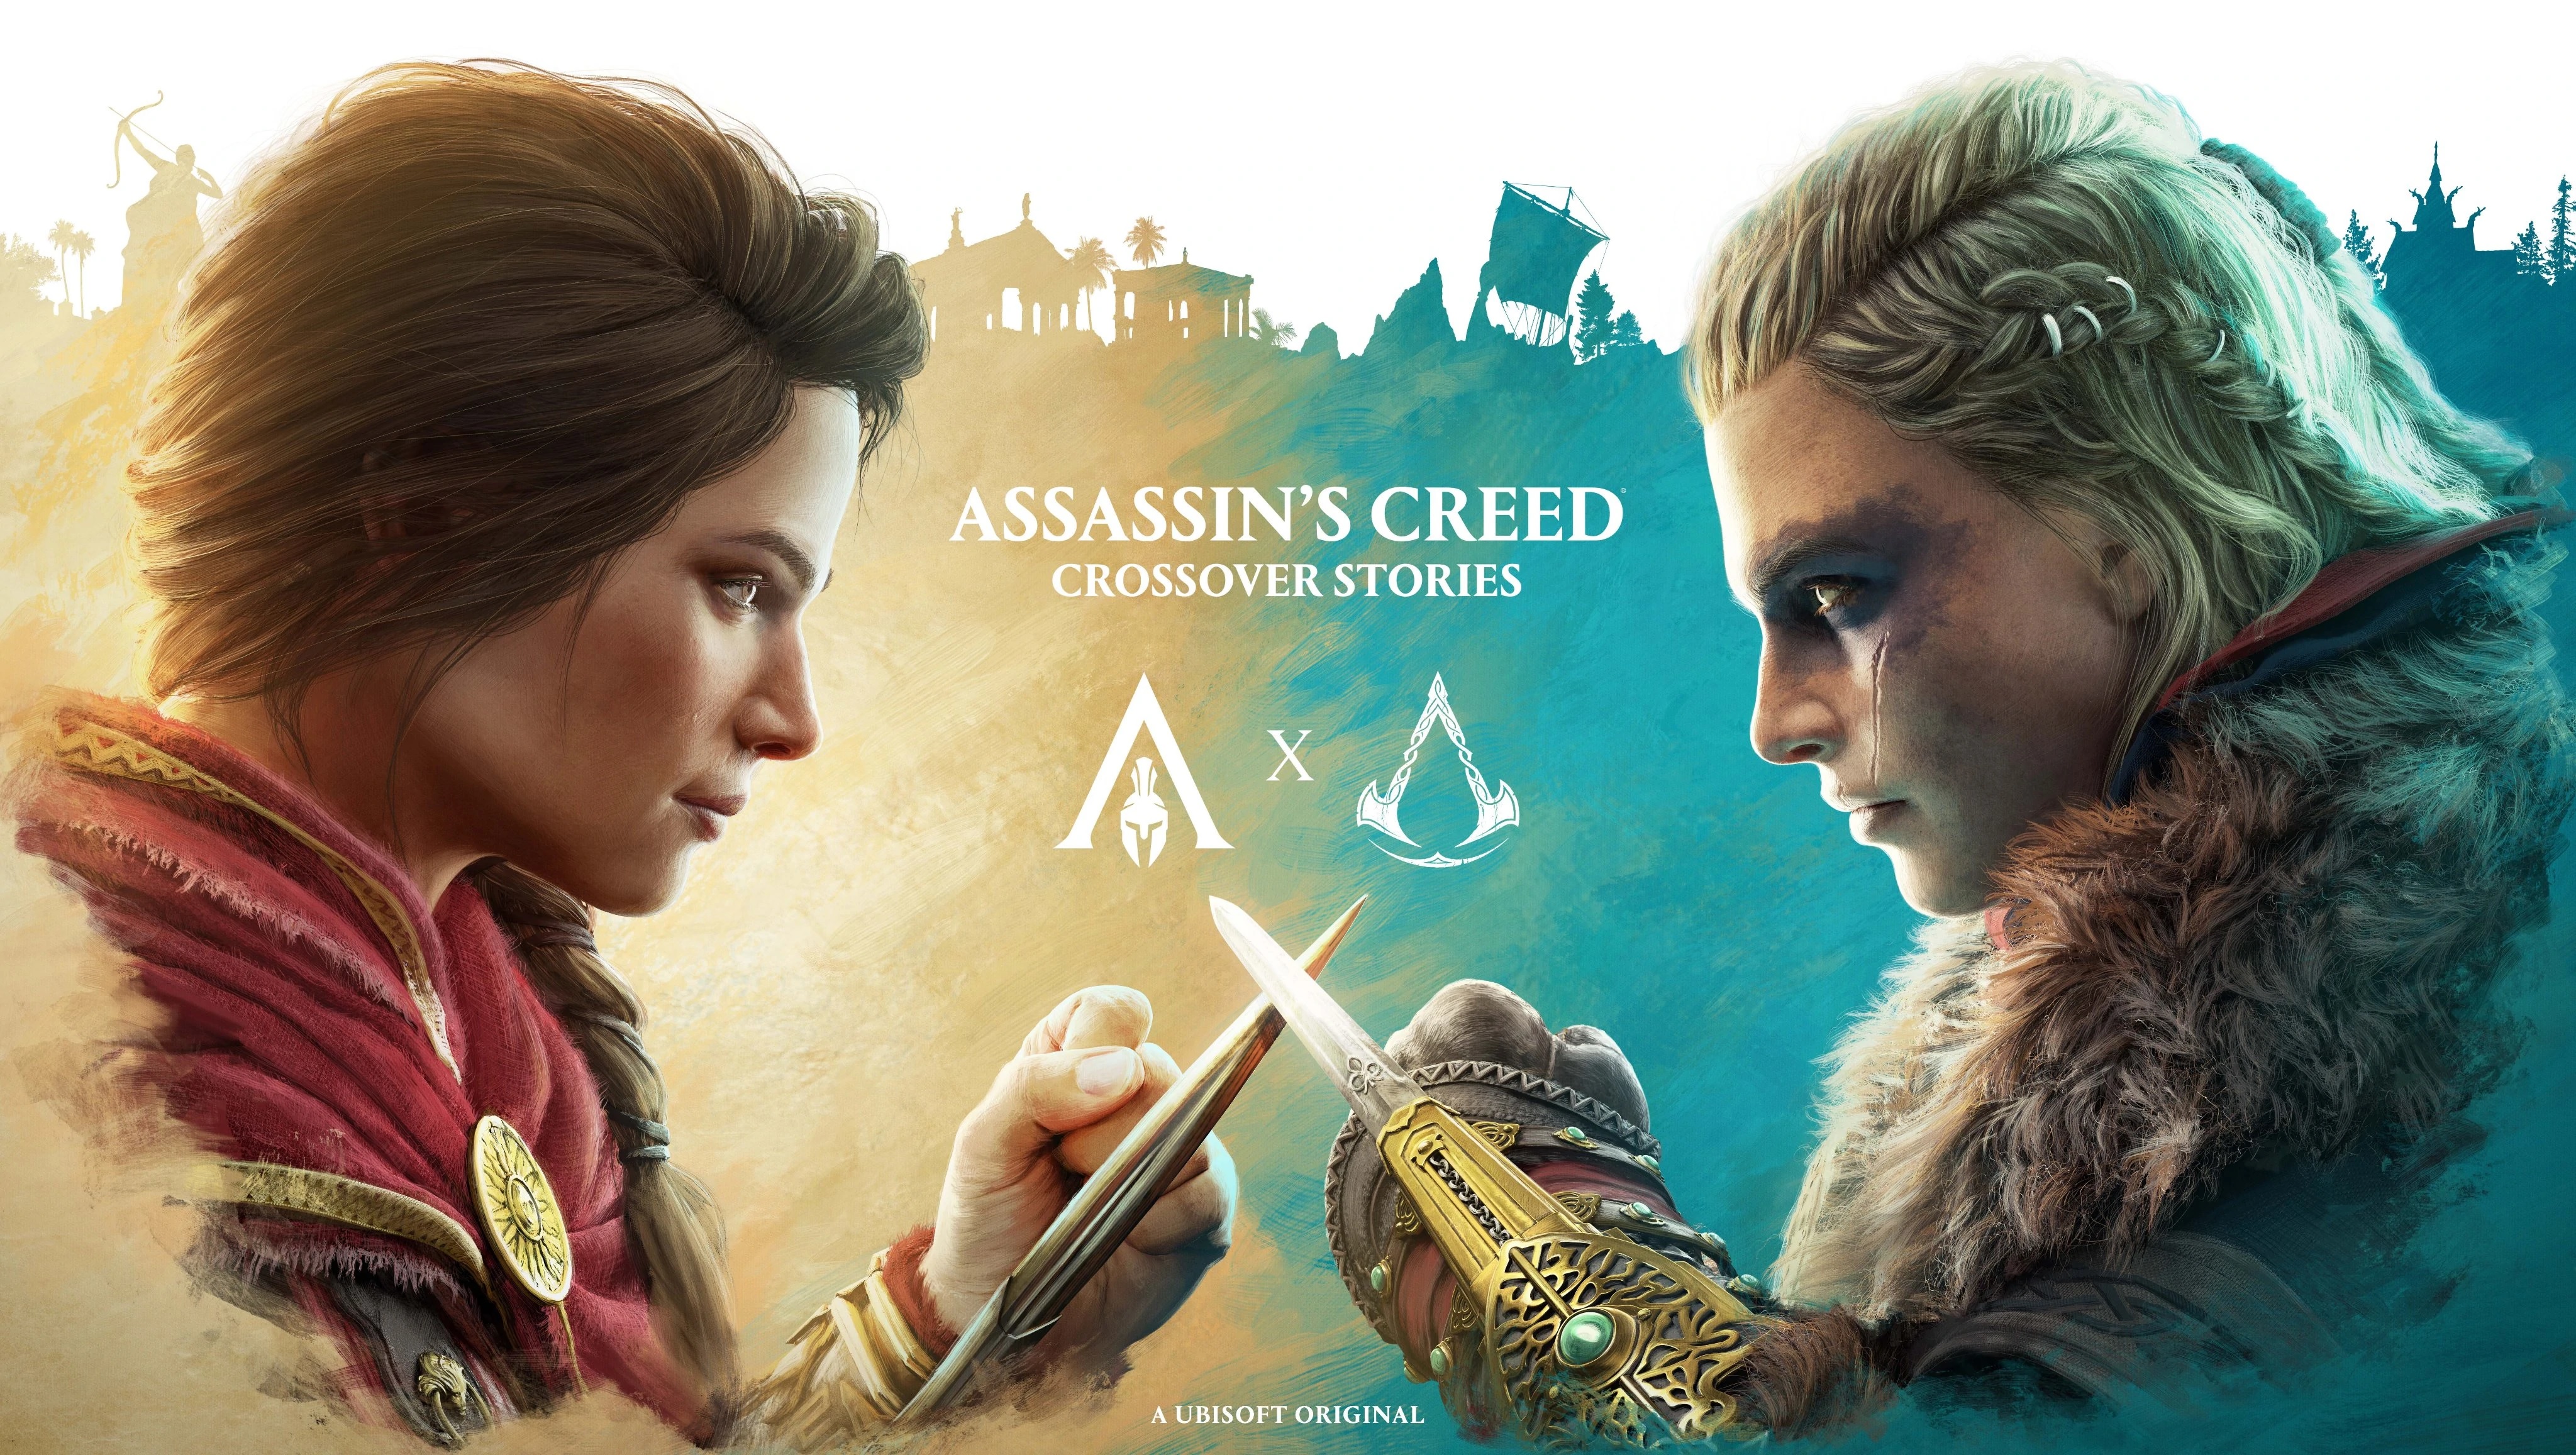 Assassin's Creed Valhalla: Why It's One Of The Franchise's Best - The  Review Crew 